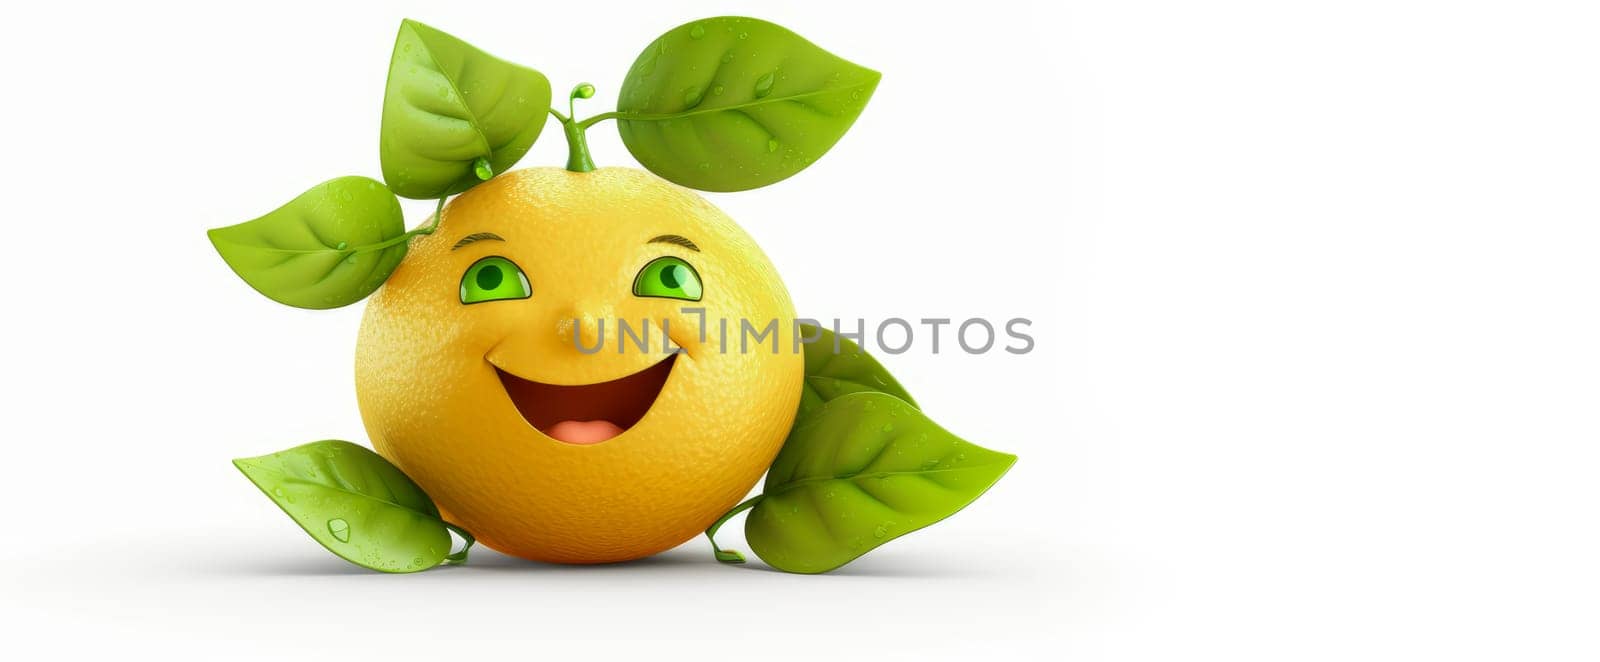 Bergamot with a cheerful face 3D on a white background. Cartoon characters, three-dimensional character, healthy lifestyle, proper nutrition, diet, fresh vegetables and fruits, vegetarianism, veganism, food, breakfast, fun, laughter, banner